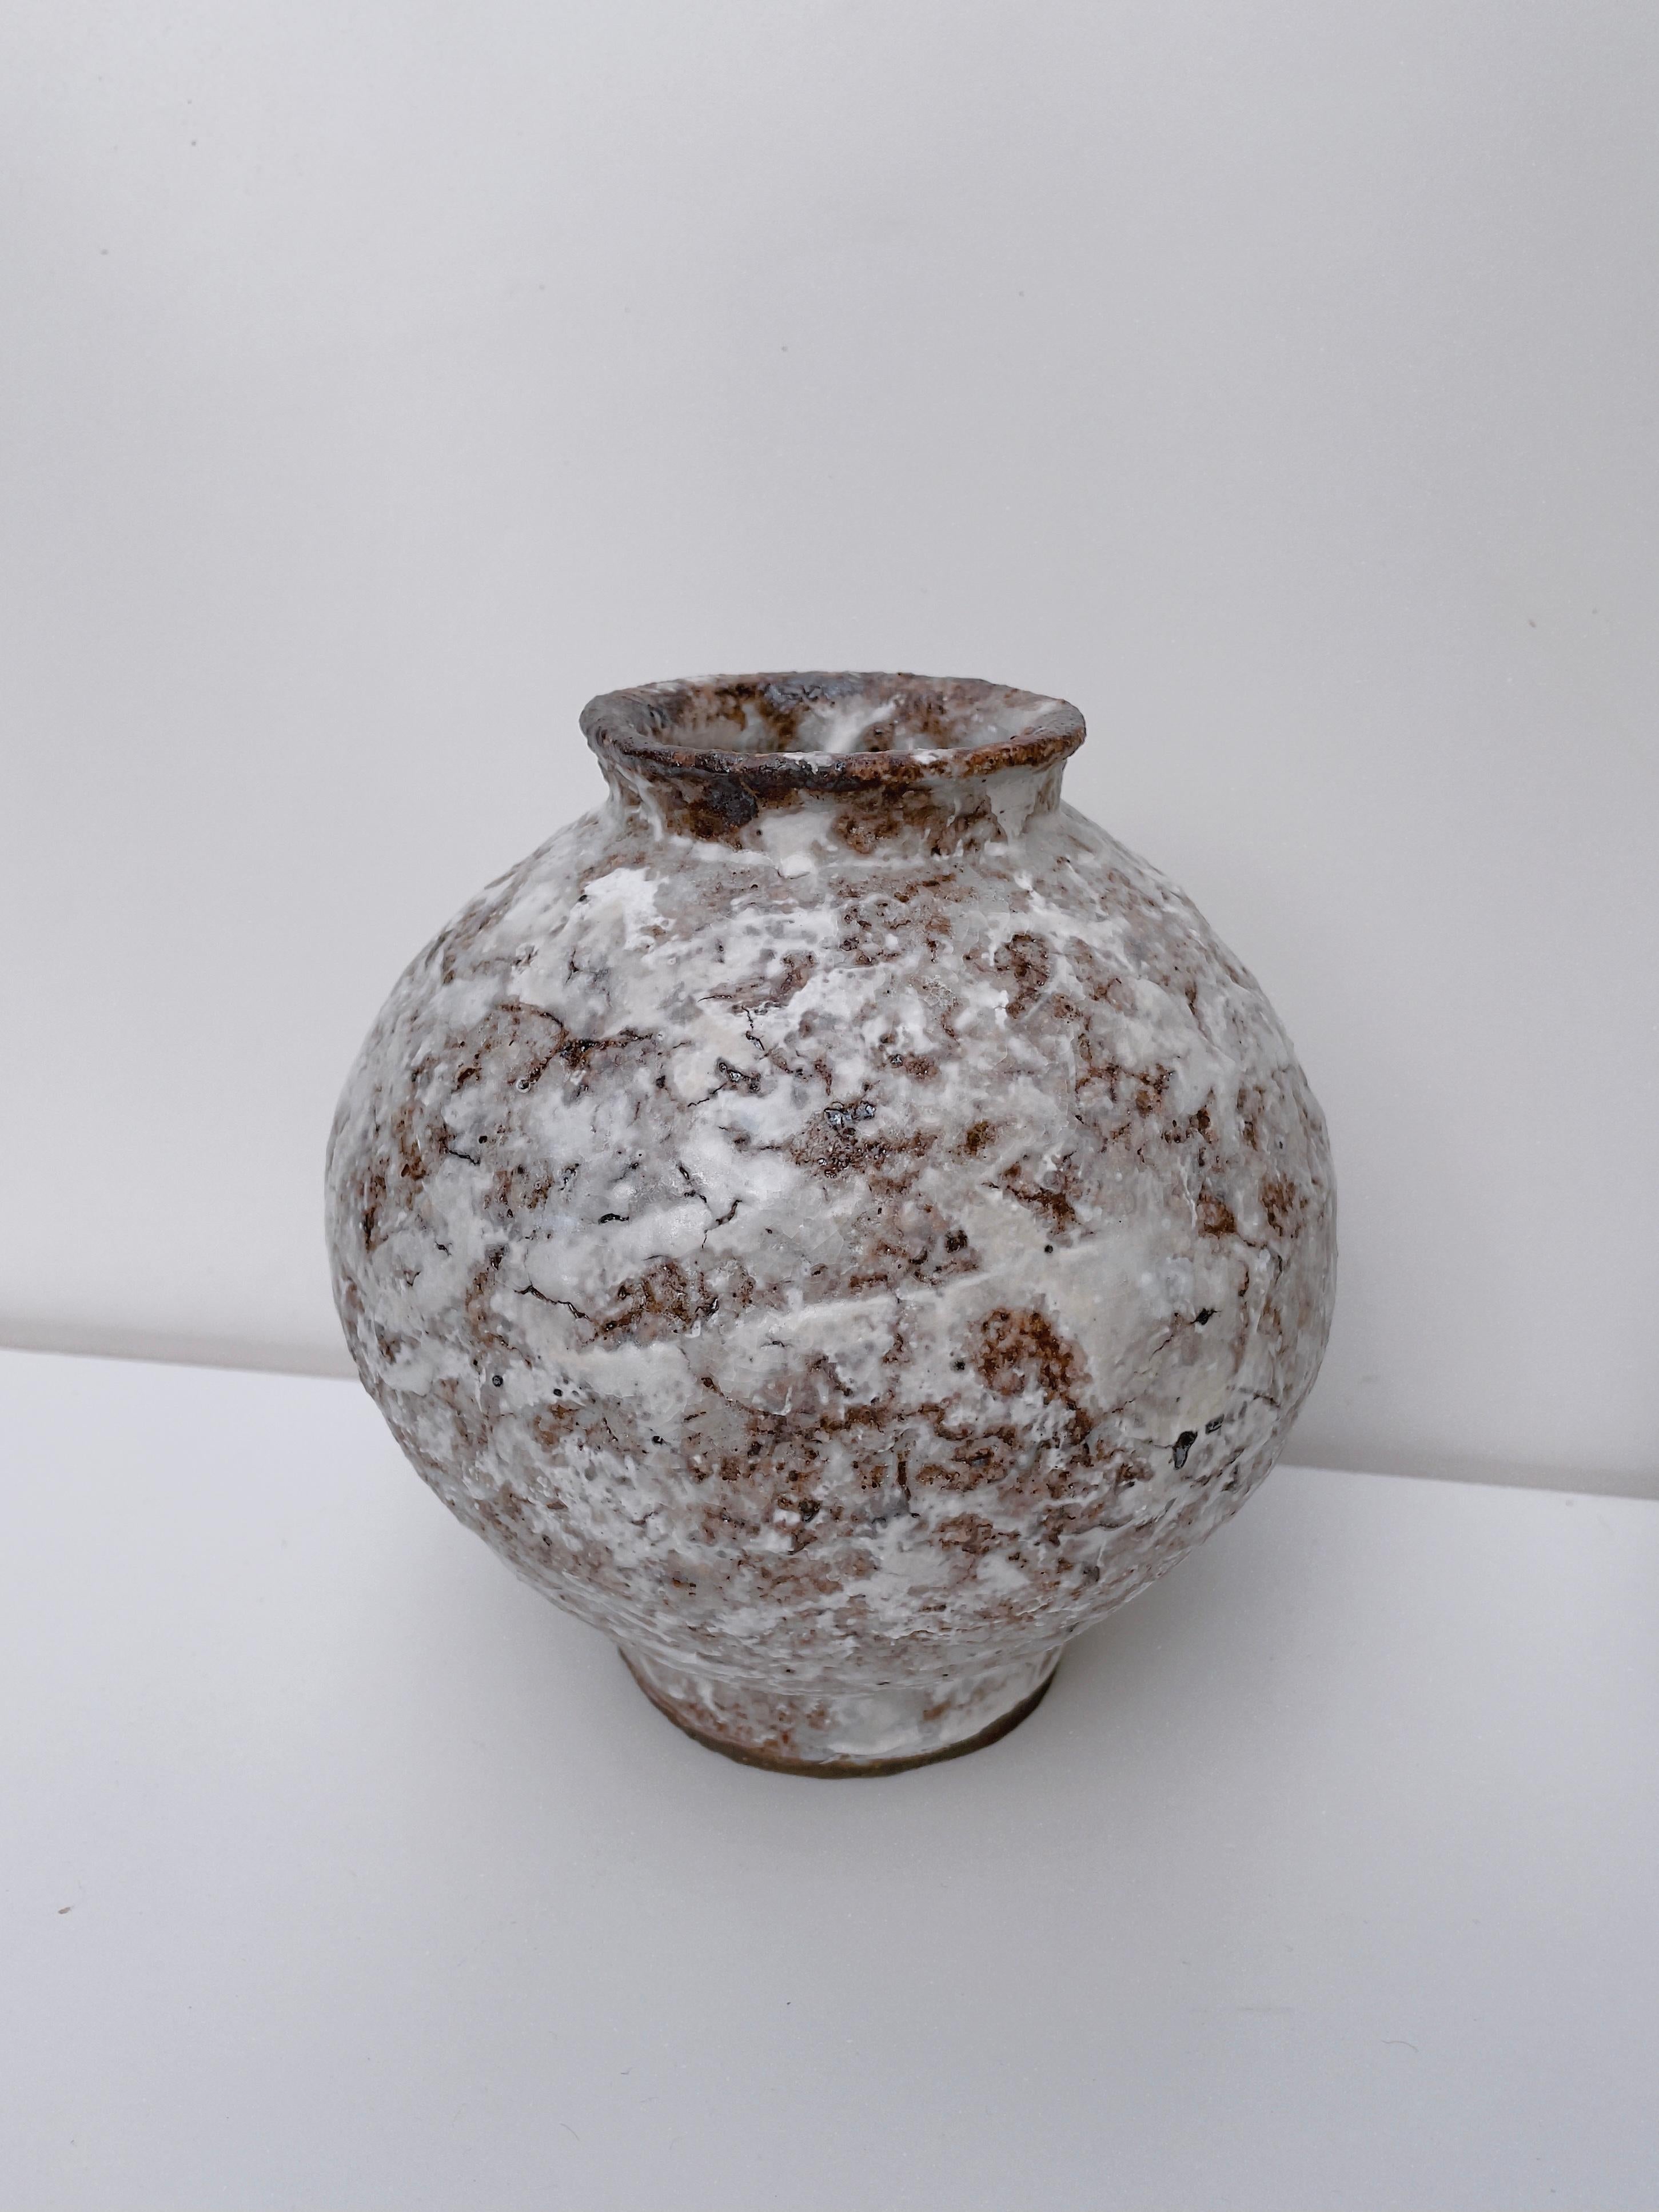 Small white rituals vase by Lisa Geue
Dimensions: D 17 x W 16 x H 16 cm
Materials: Terracotta, Kaolin wash, Shino glazes.
Non-functional.

By researching ancient and indigenous rites, practices, and rituals, Geue observes the meaning of the